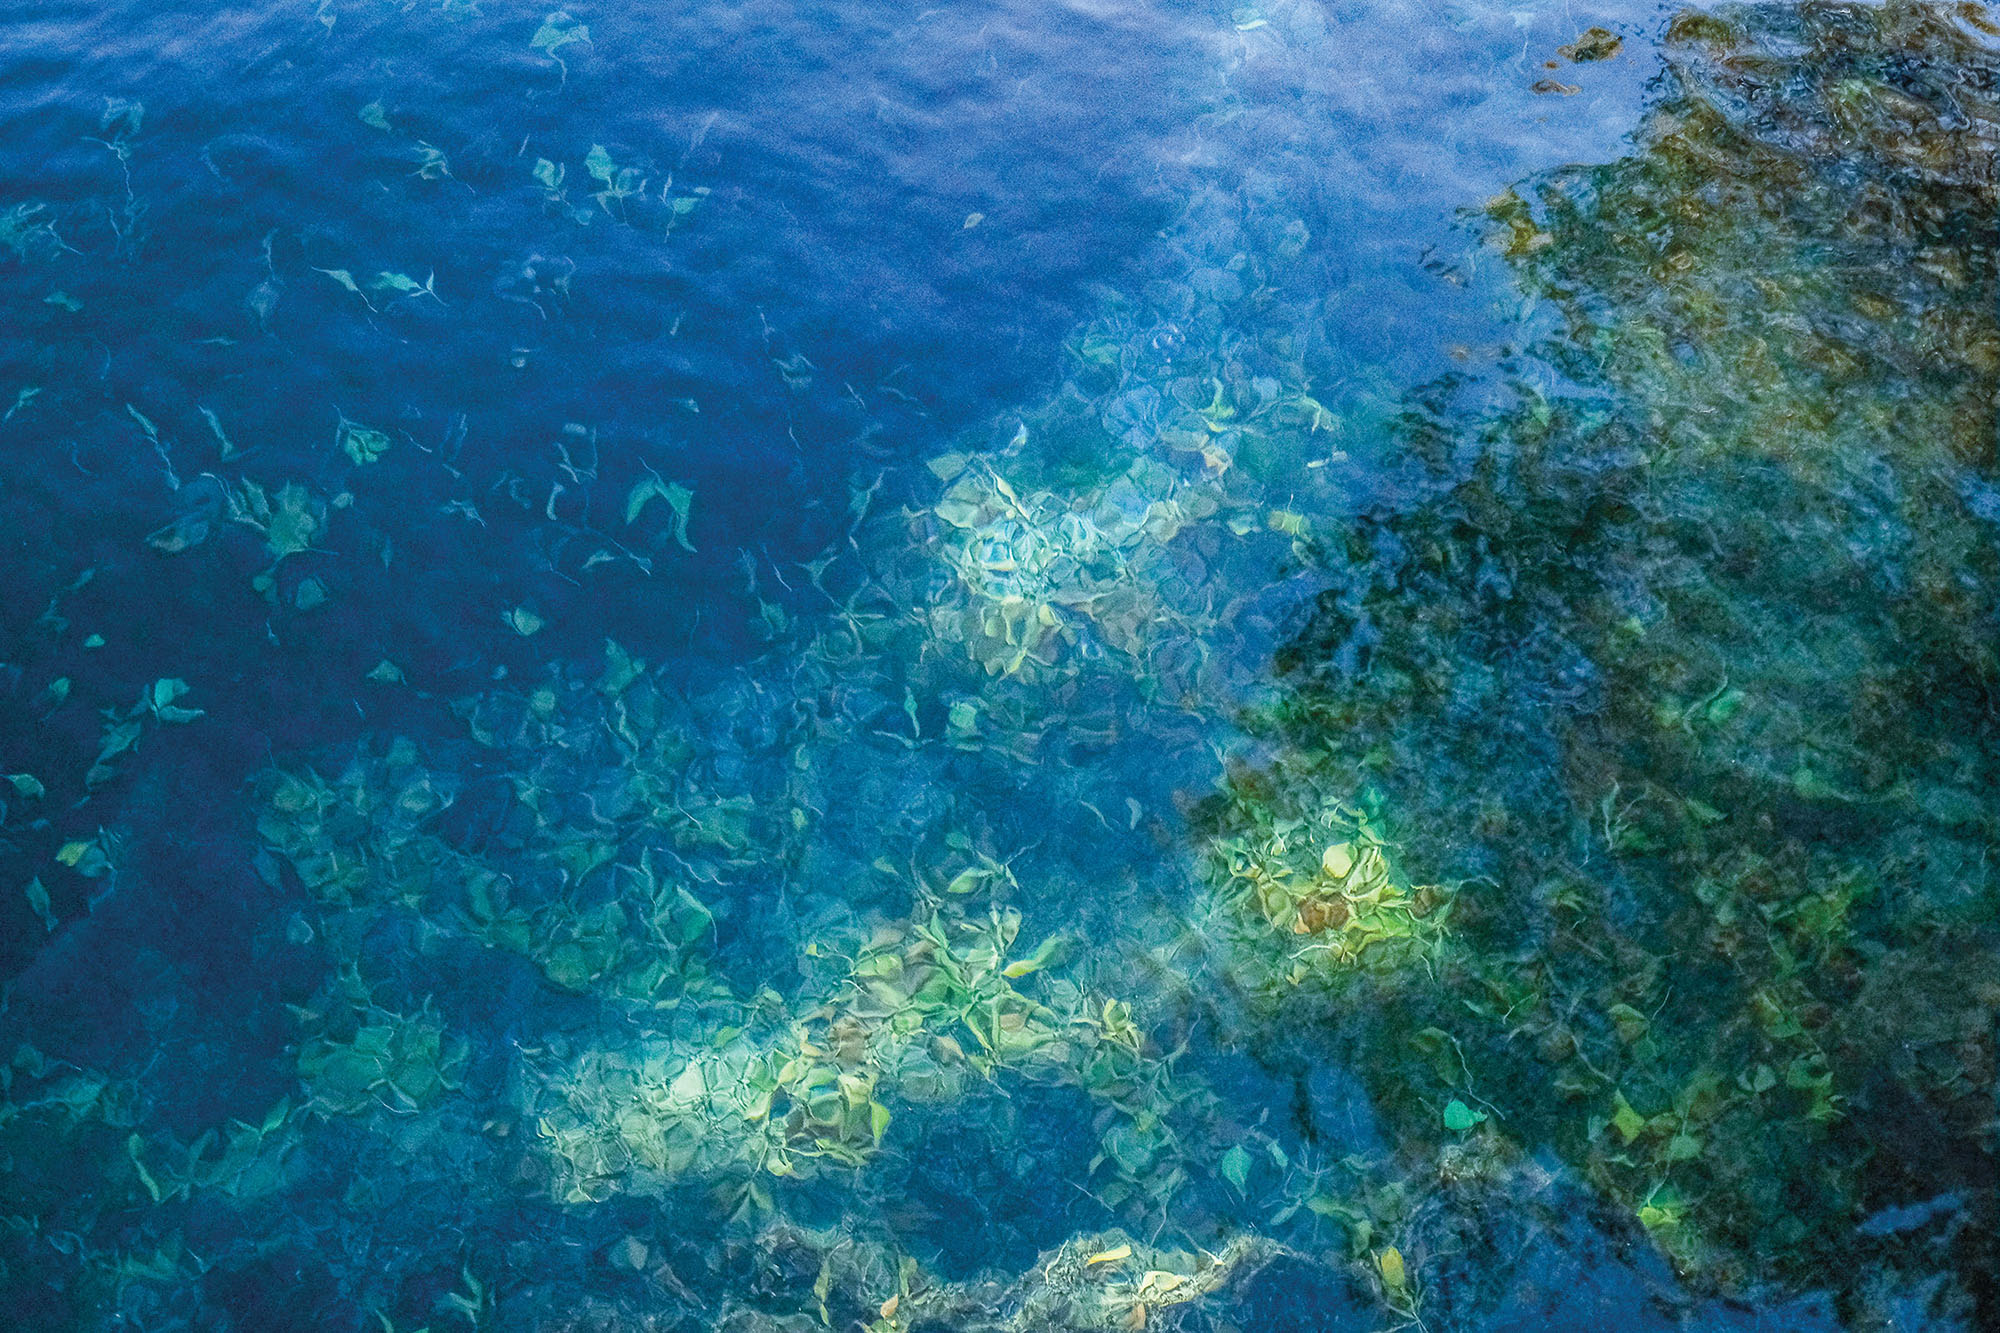 An overhead view of clear blue wataer with fish and a reef visible beneath